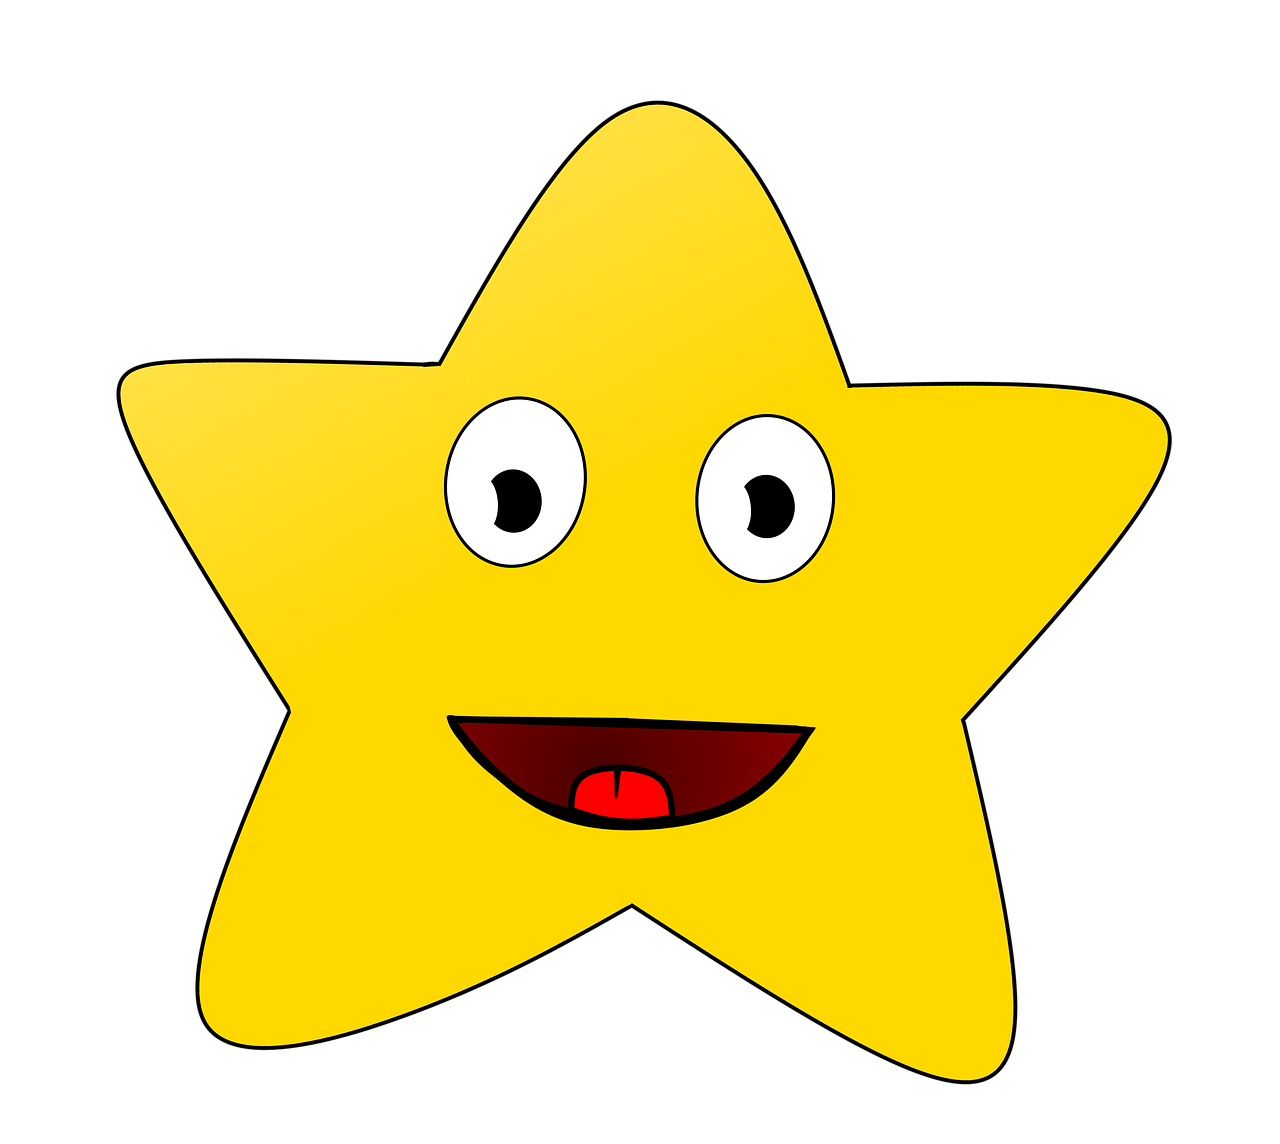 Download Free Photo Of Star Face Smile Cartoon Night From